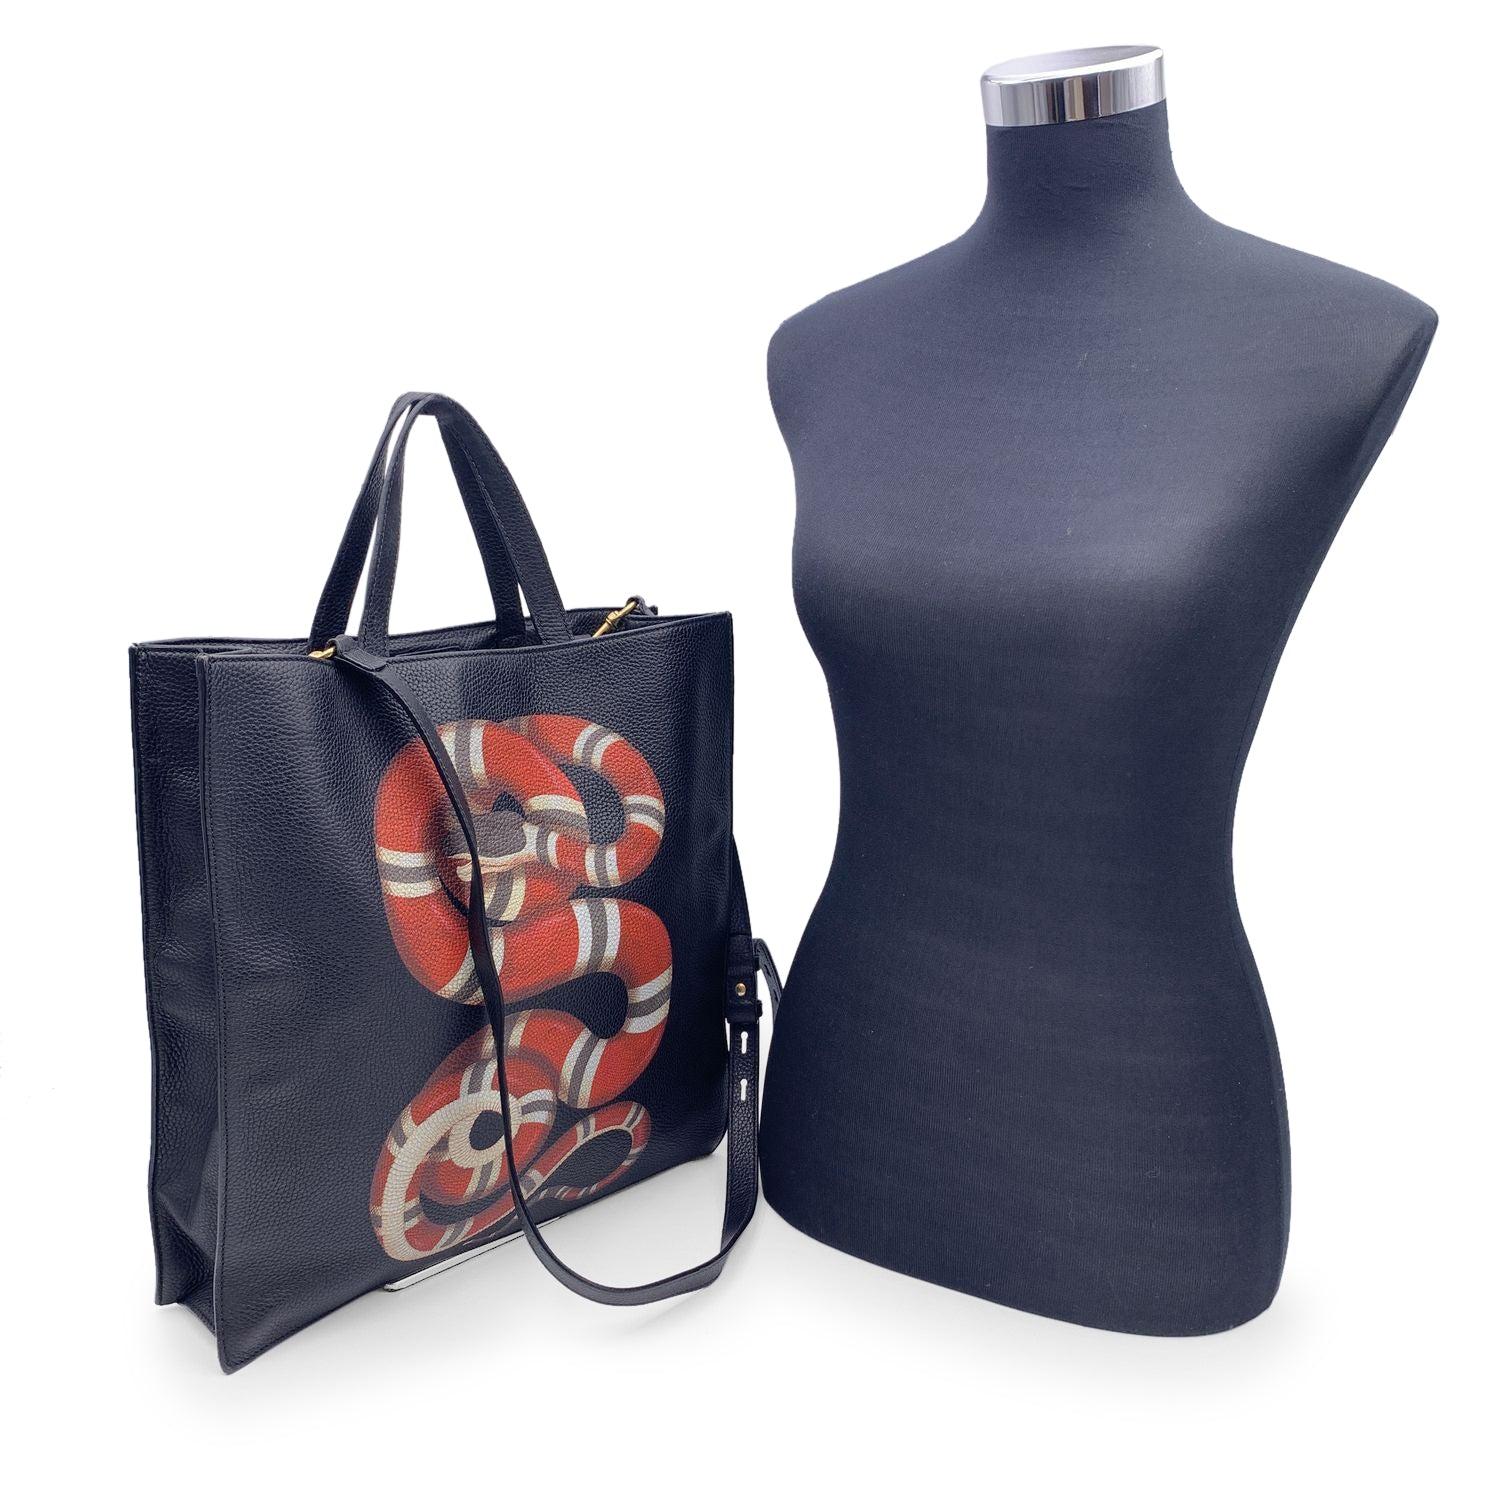 Beautiful Gucci black leather tote bag with Kingsnake print. Magnetic button closure on top. Double top carry handle. Cotton linen lining with 25 print. 2 side zip pocket inside. Made in Italy. The tote comes with a removable shoulder strap. 'GUCCI